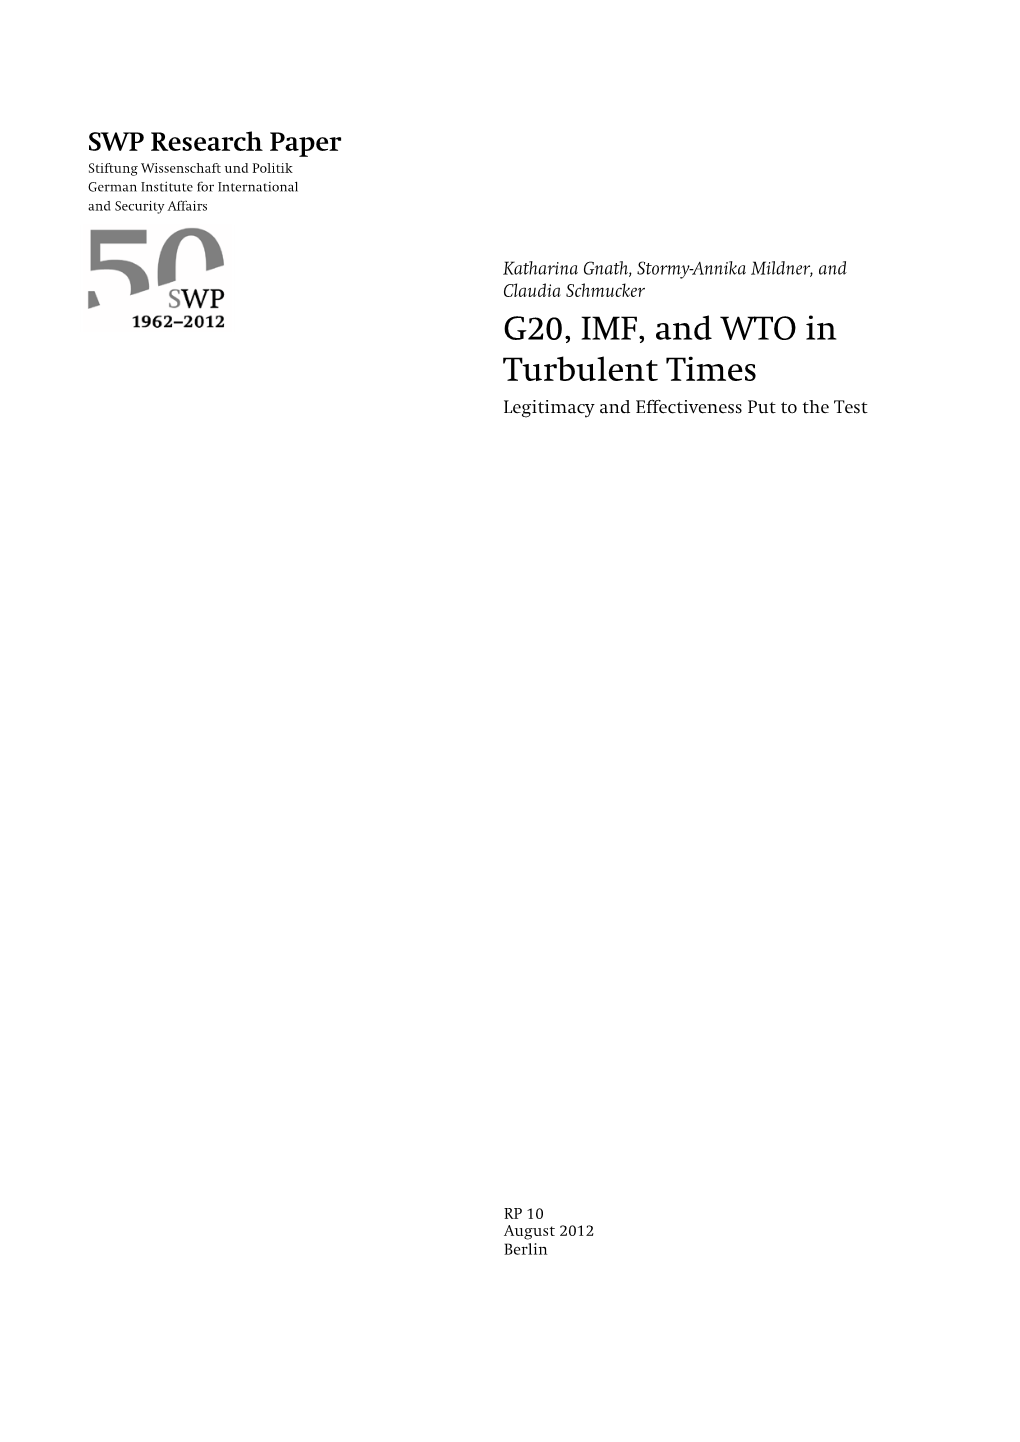 G20, IMF, and WTO in Turbulent Times. Legitimacy And